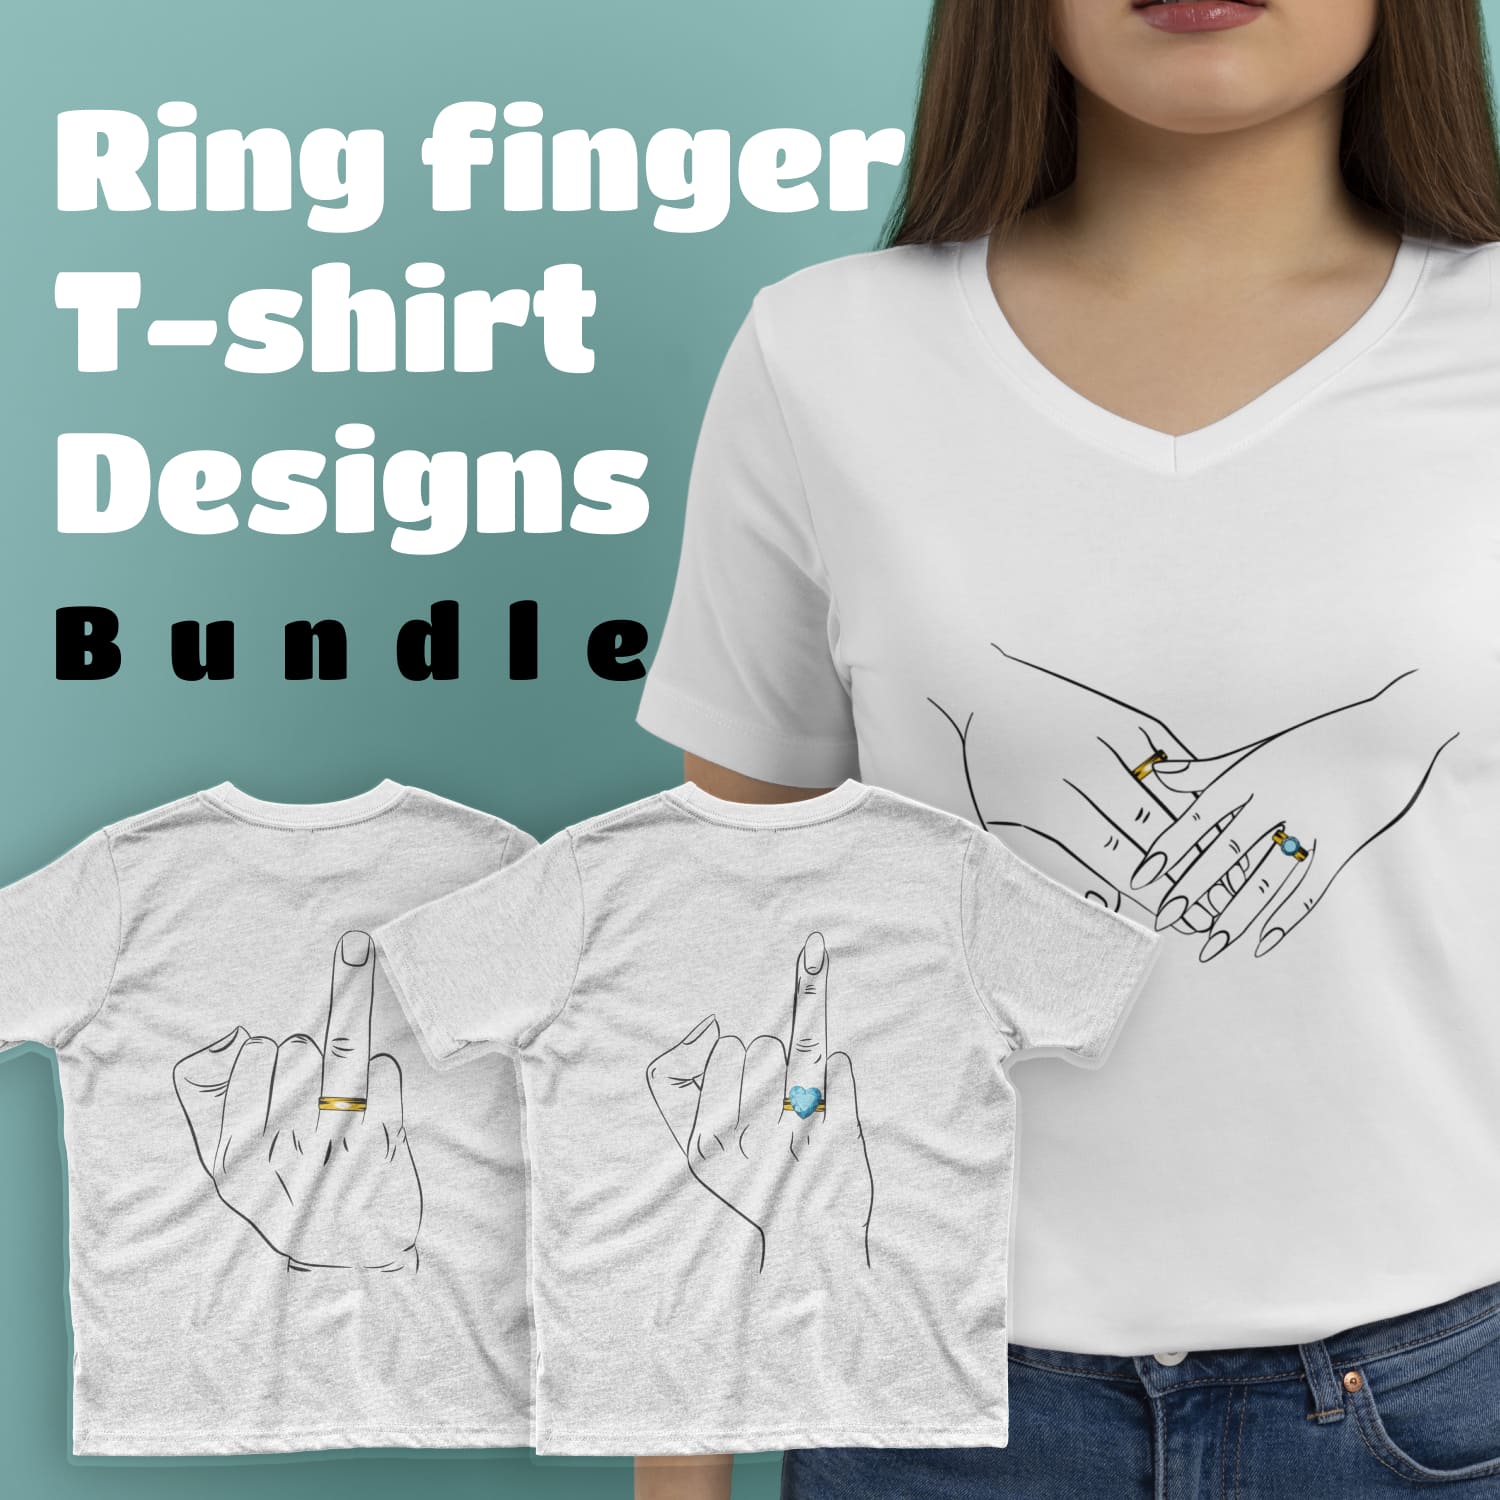 Collection of images of t-shirts with a charming print of a finger with a ring.